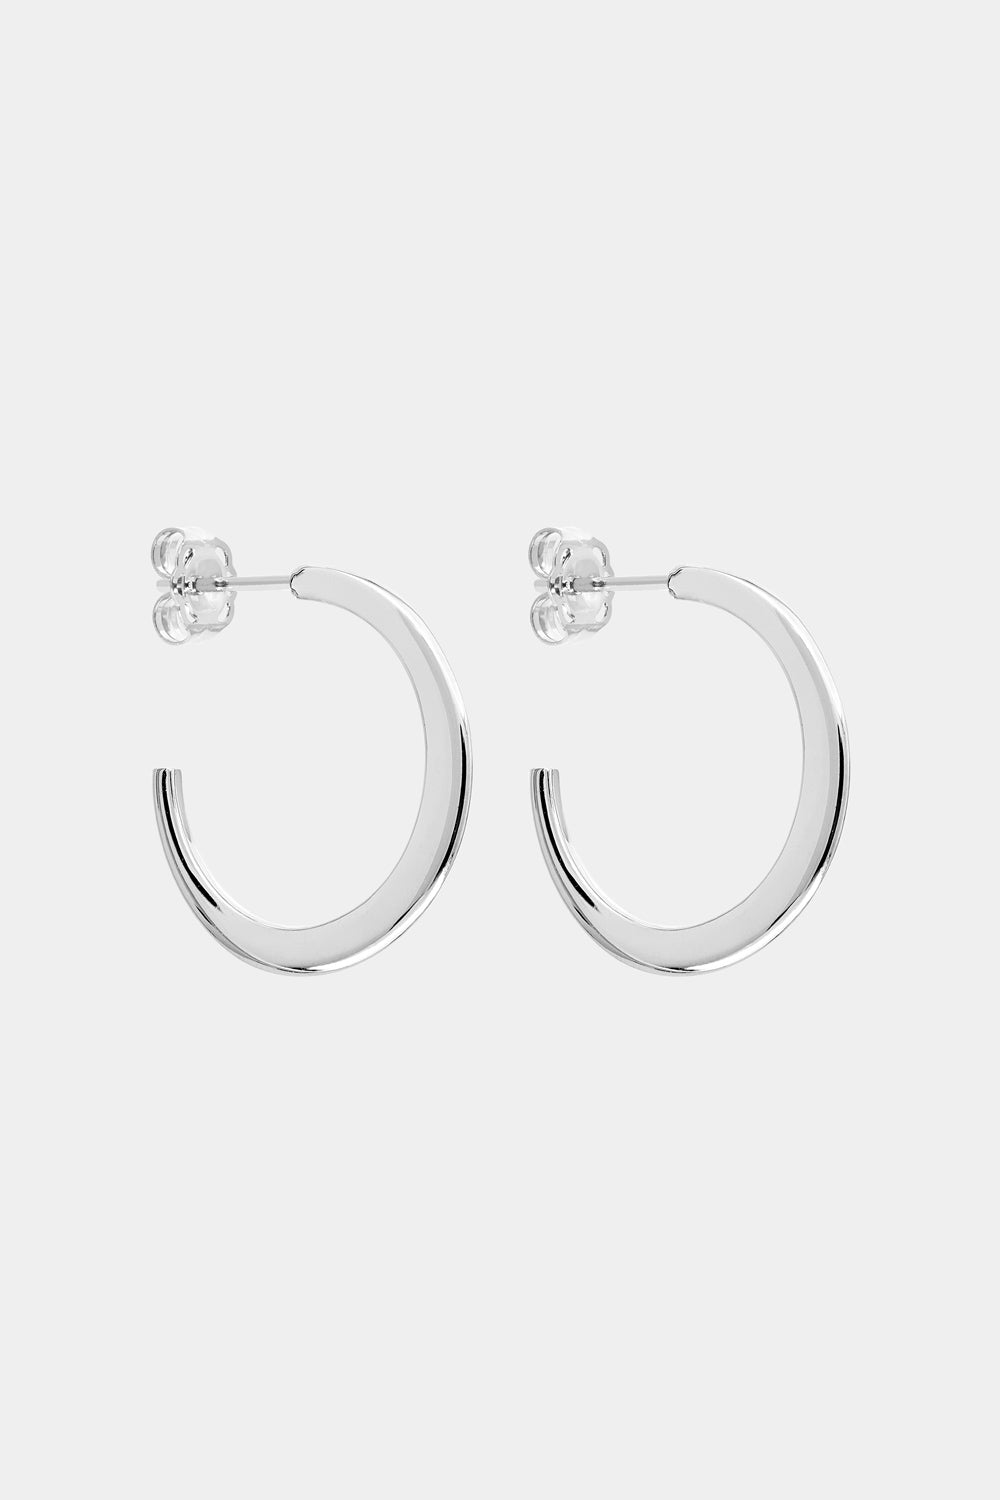 Single Band Hoops | Silver or 9K White Gold